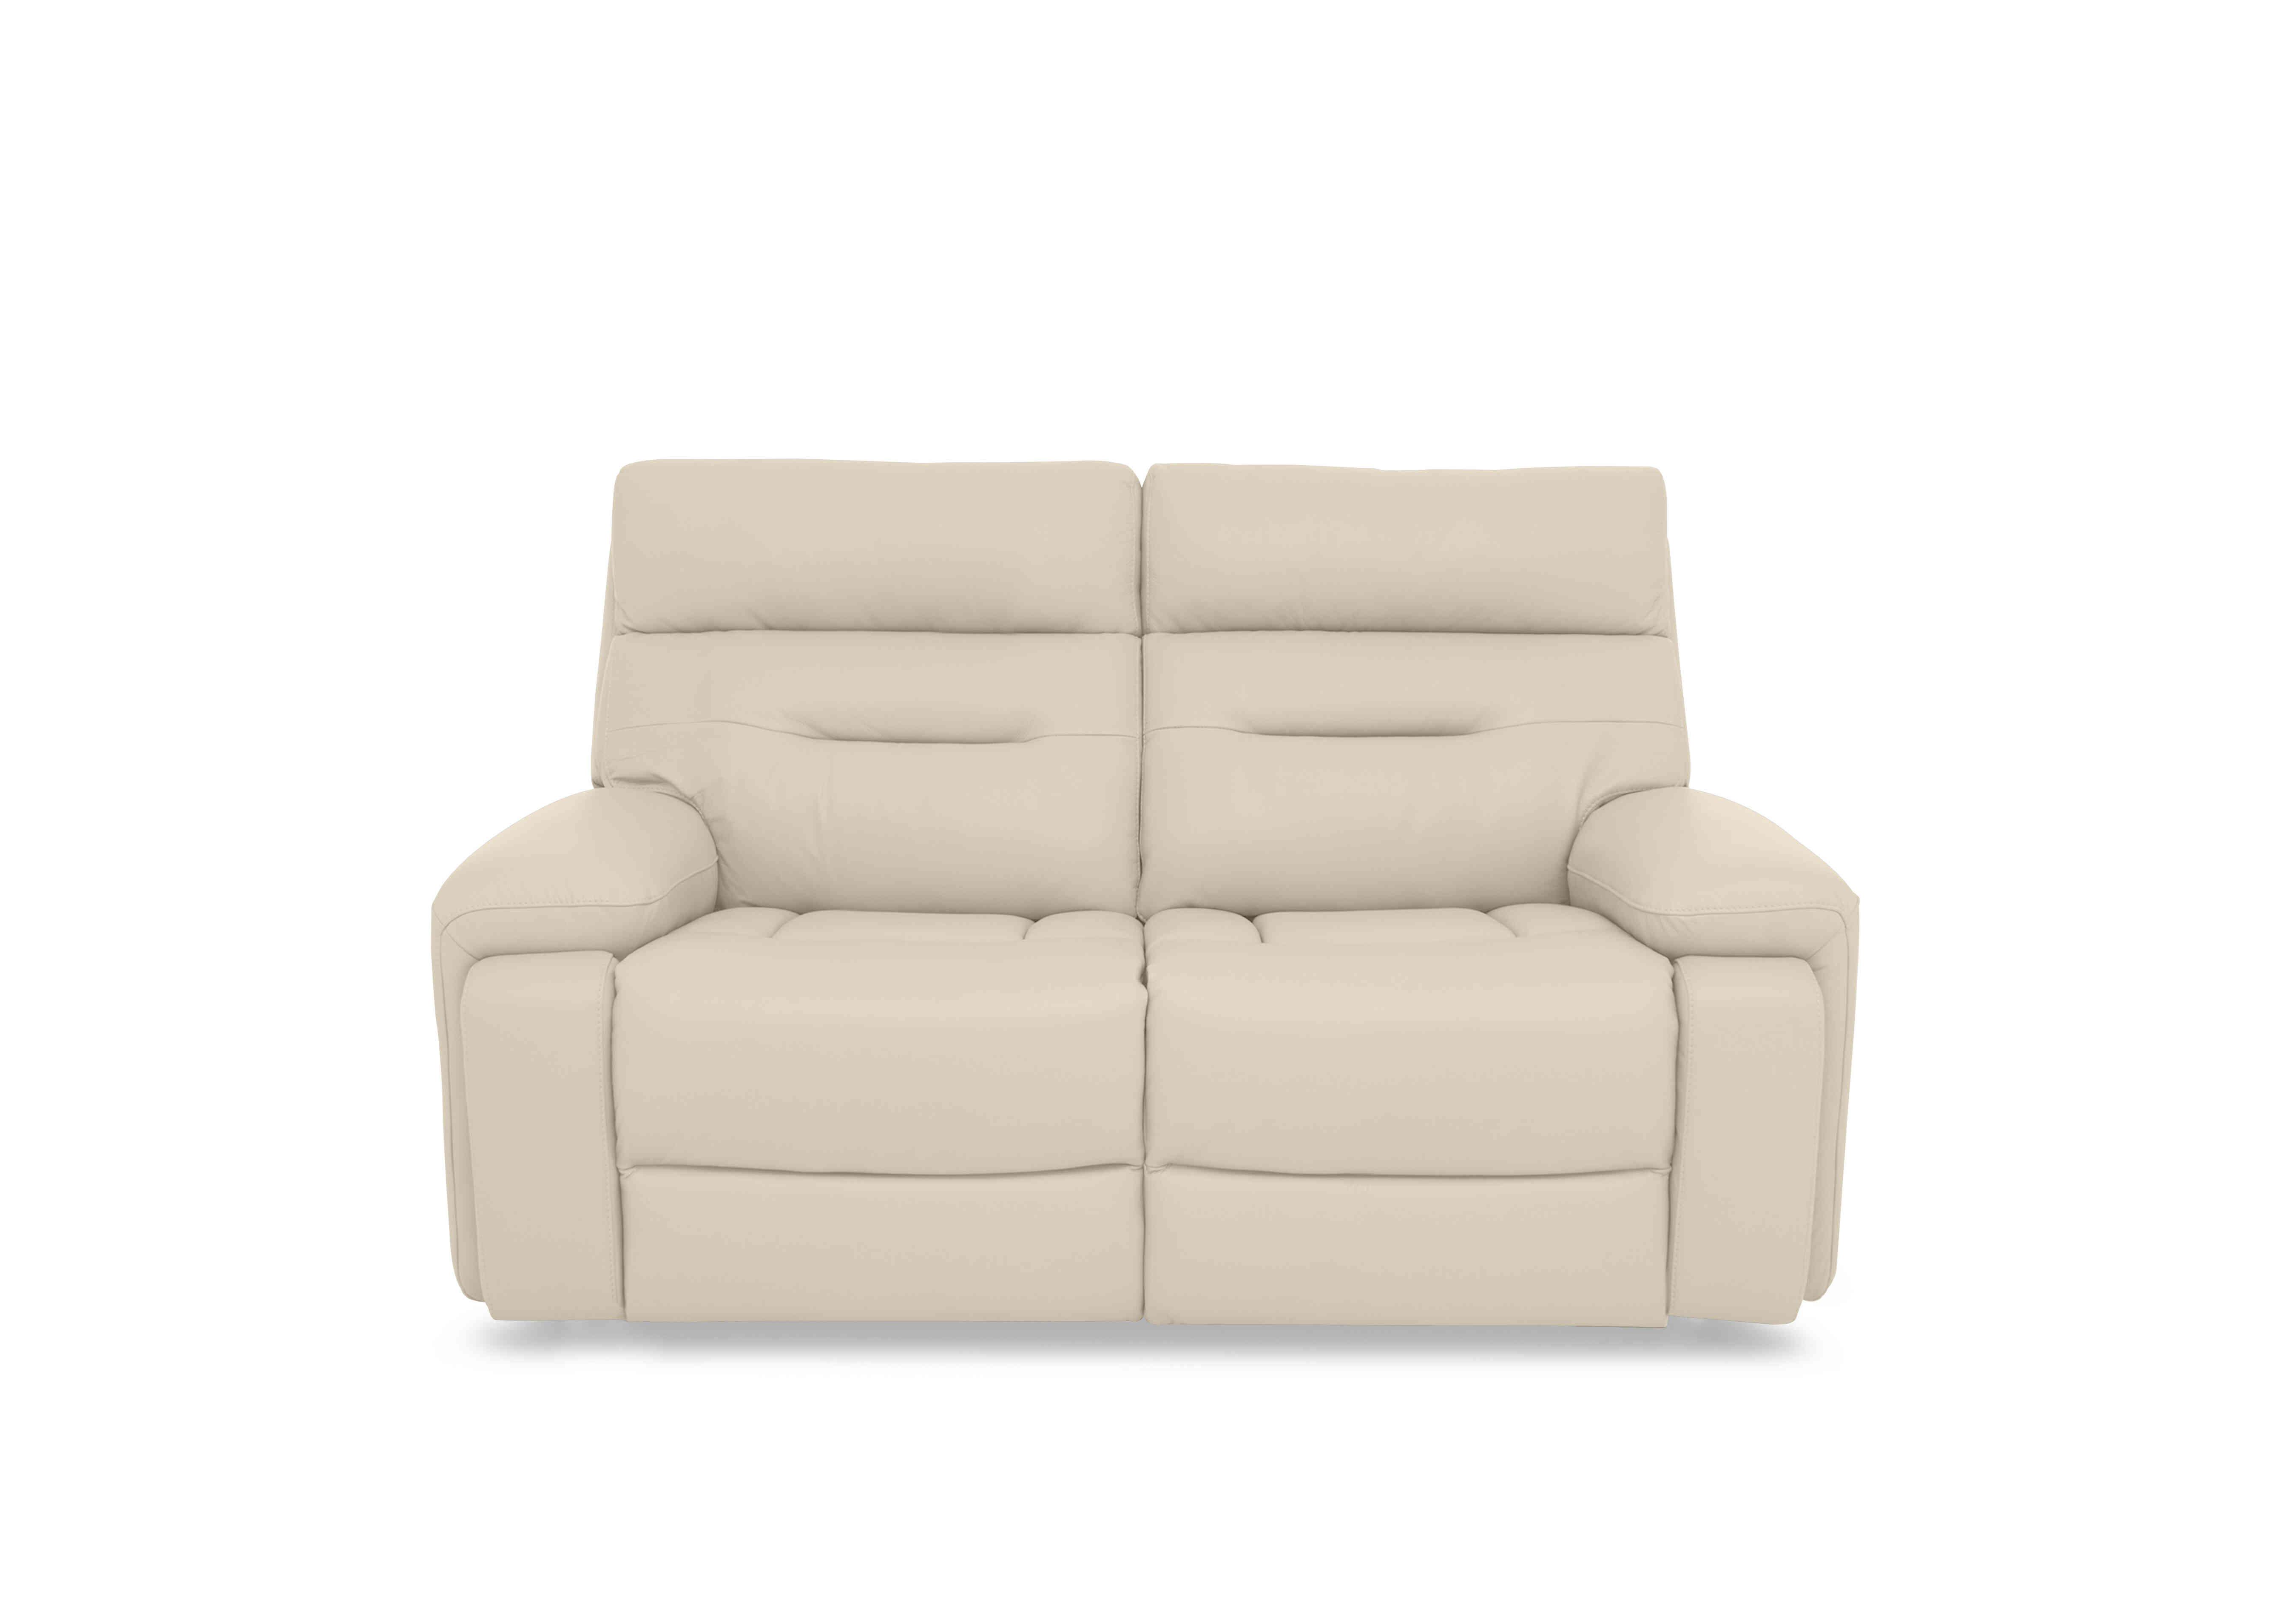 Cinemax 2 Seater Leather Sofa in Lx-6407 Stone on Furniture Village